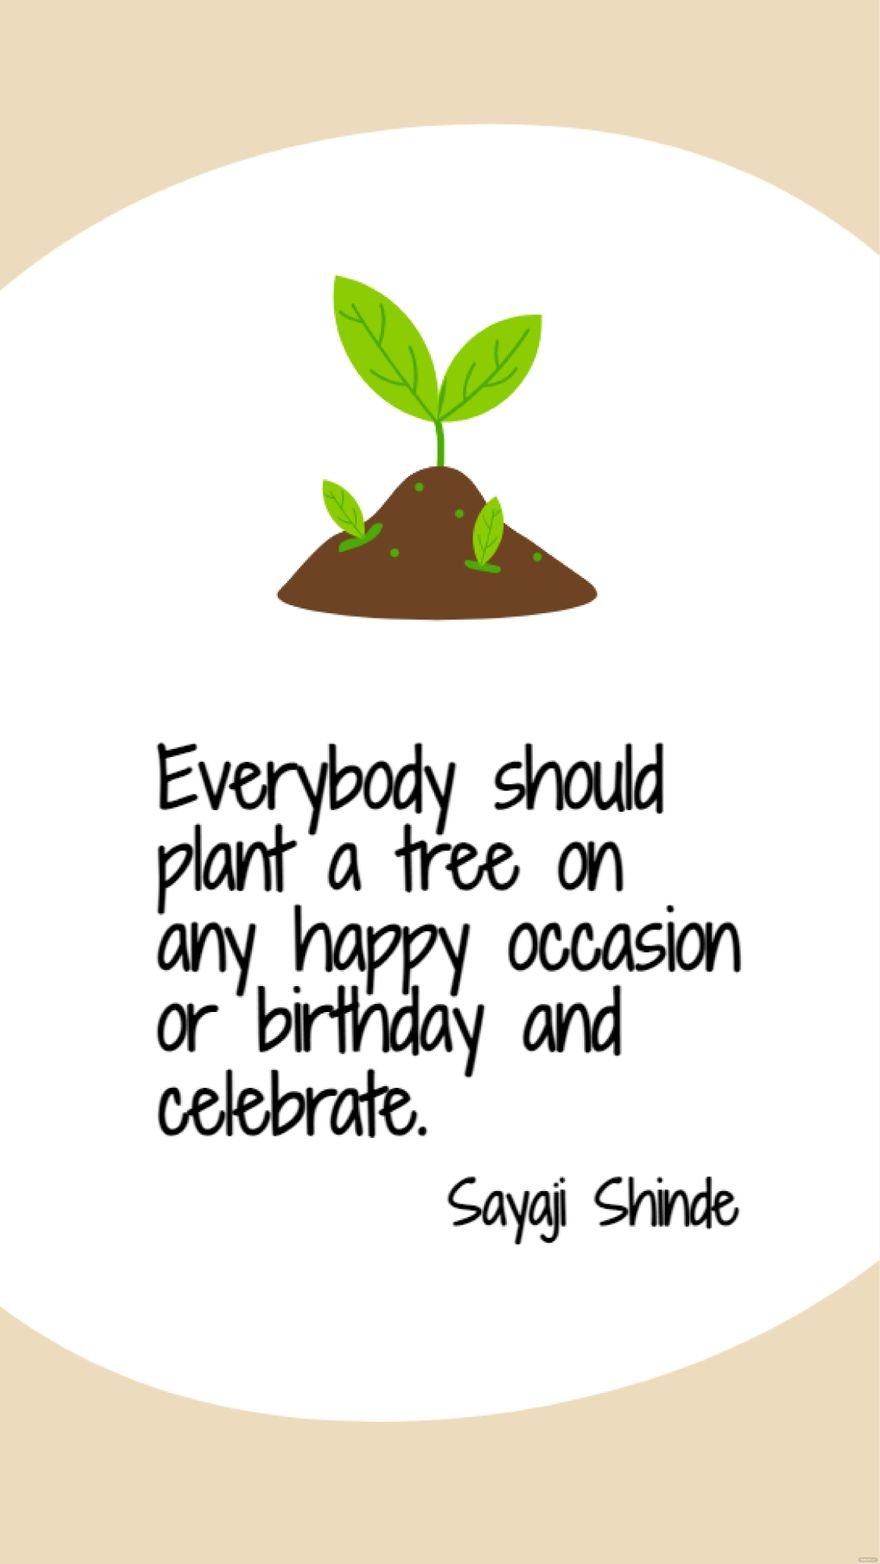 Free Sayaji Shinde - Everybody should plant a tree on any happy occasion or birthday and celebrate.